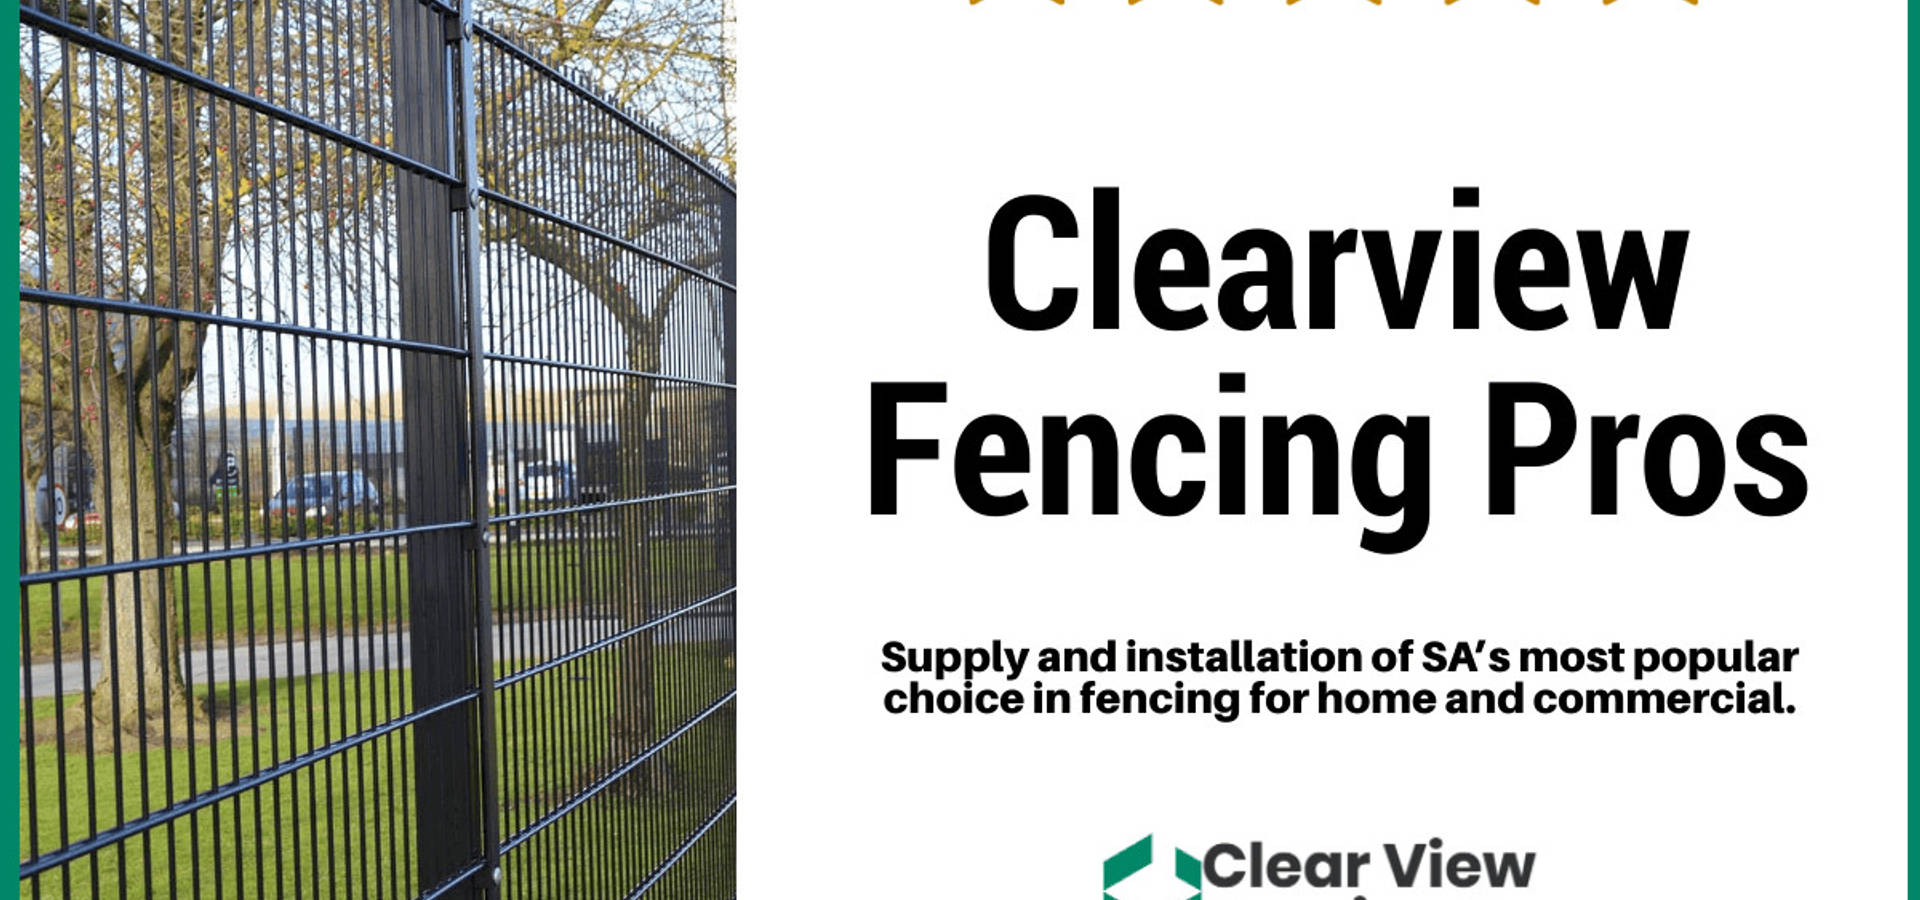 Clearview Fencing Pros